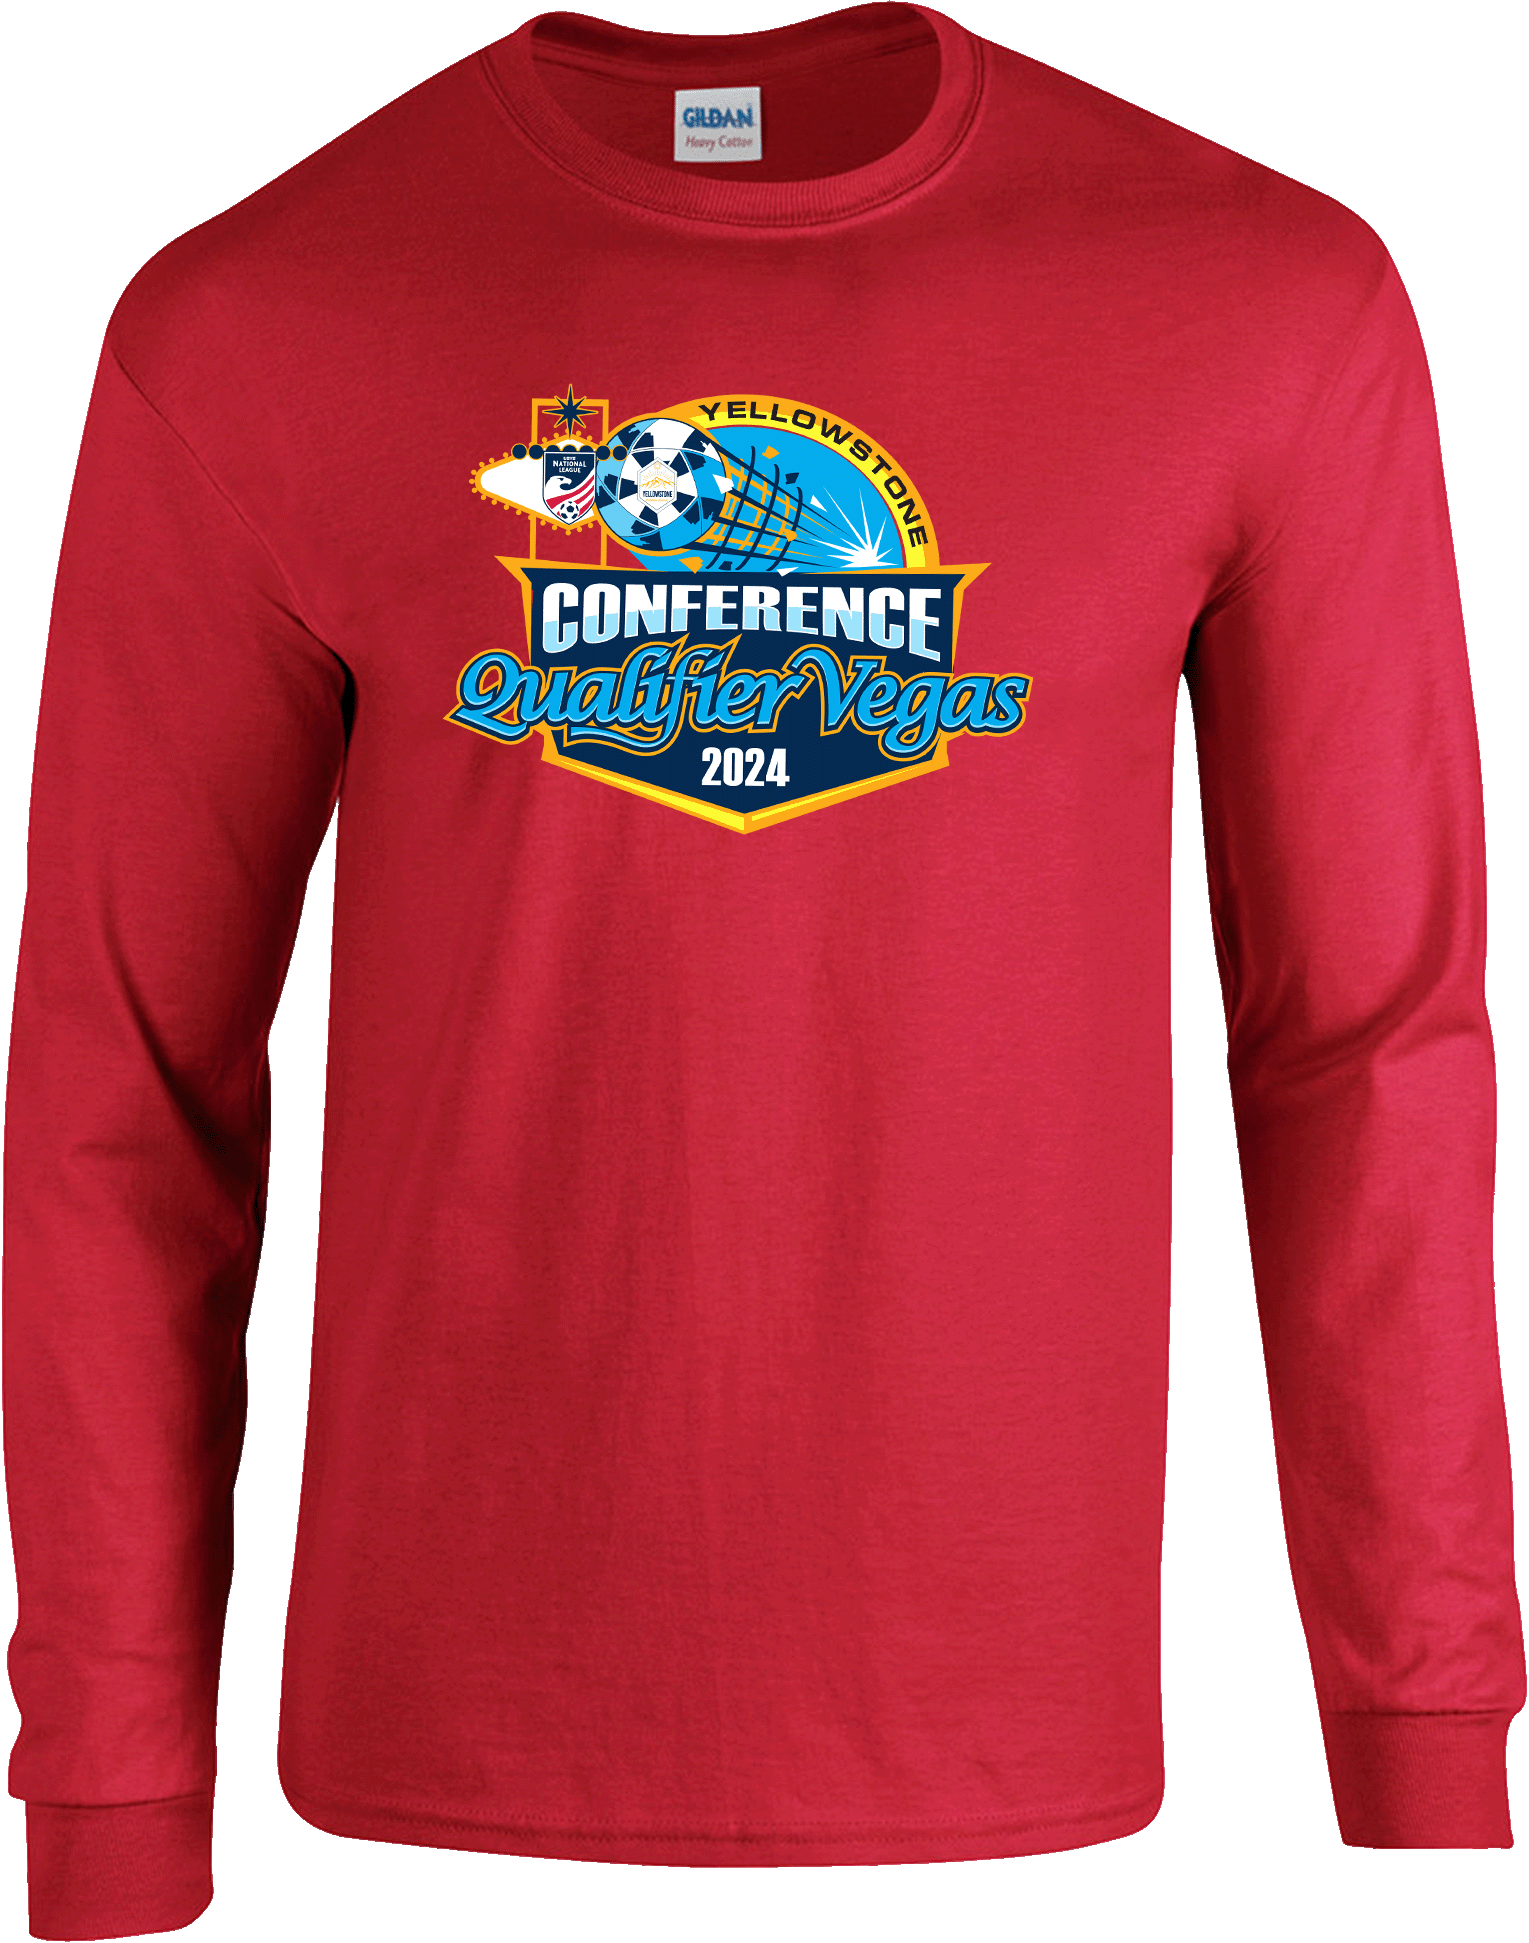 Long Sleeves - 2024 Yellowstone Conference Qualifier Vegas